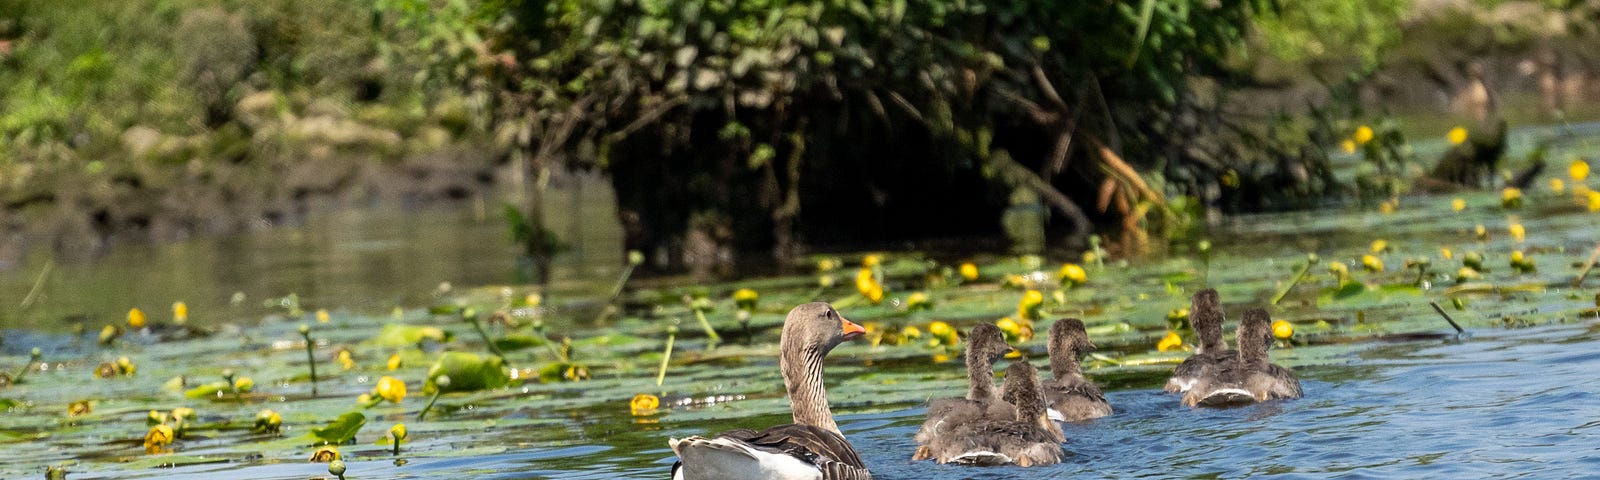 Mother Goose and Her Goslings ©2022 Sarah-Jane White. All Rights Reserved.